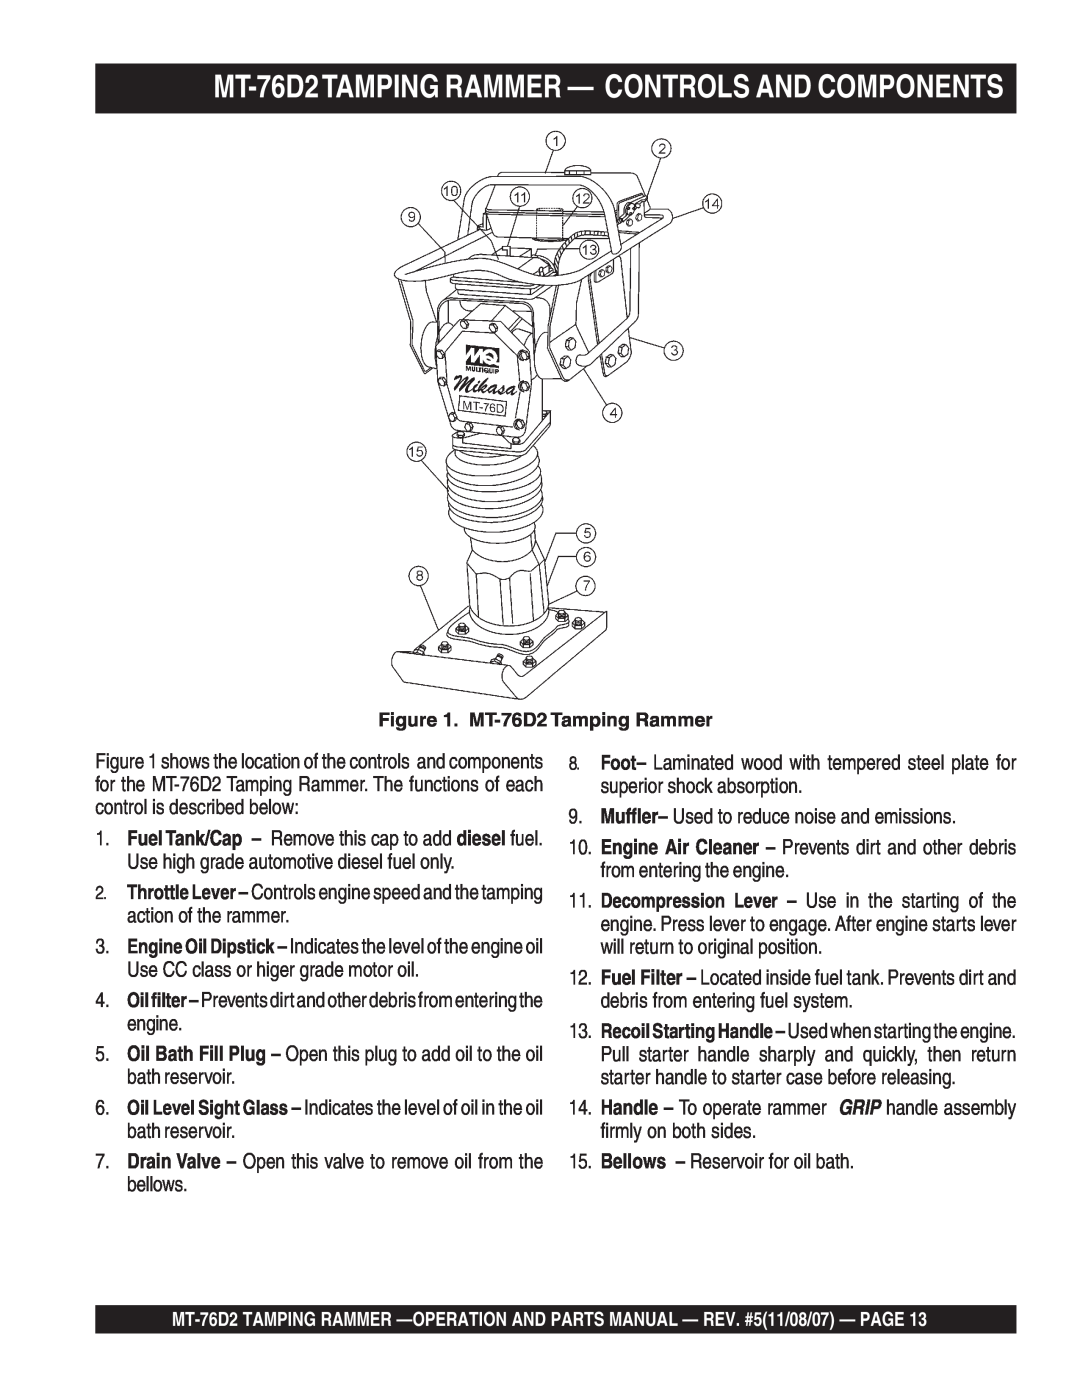 Multiquip manual MT-76D2TAMPING RAMMER - CONTROLS AND COMPONENTS 